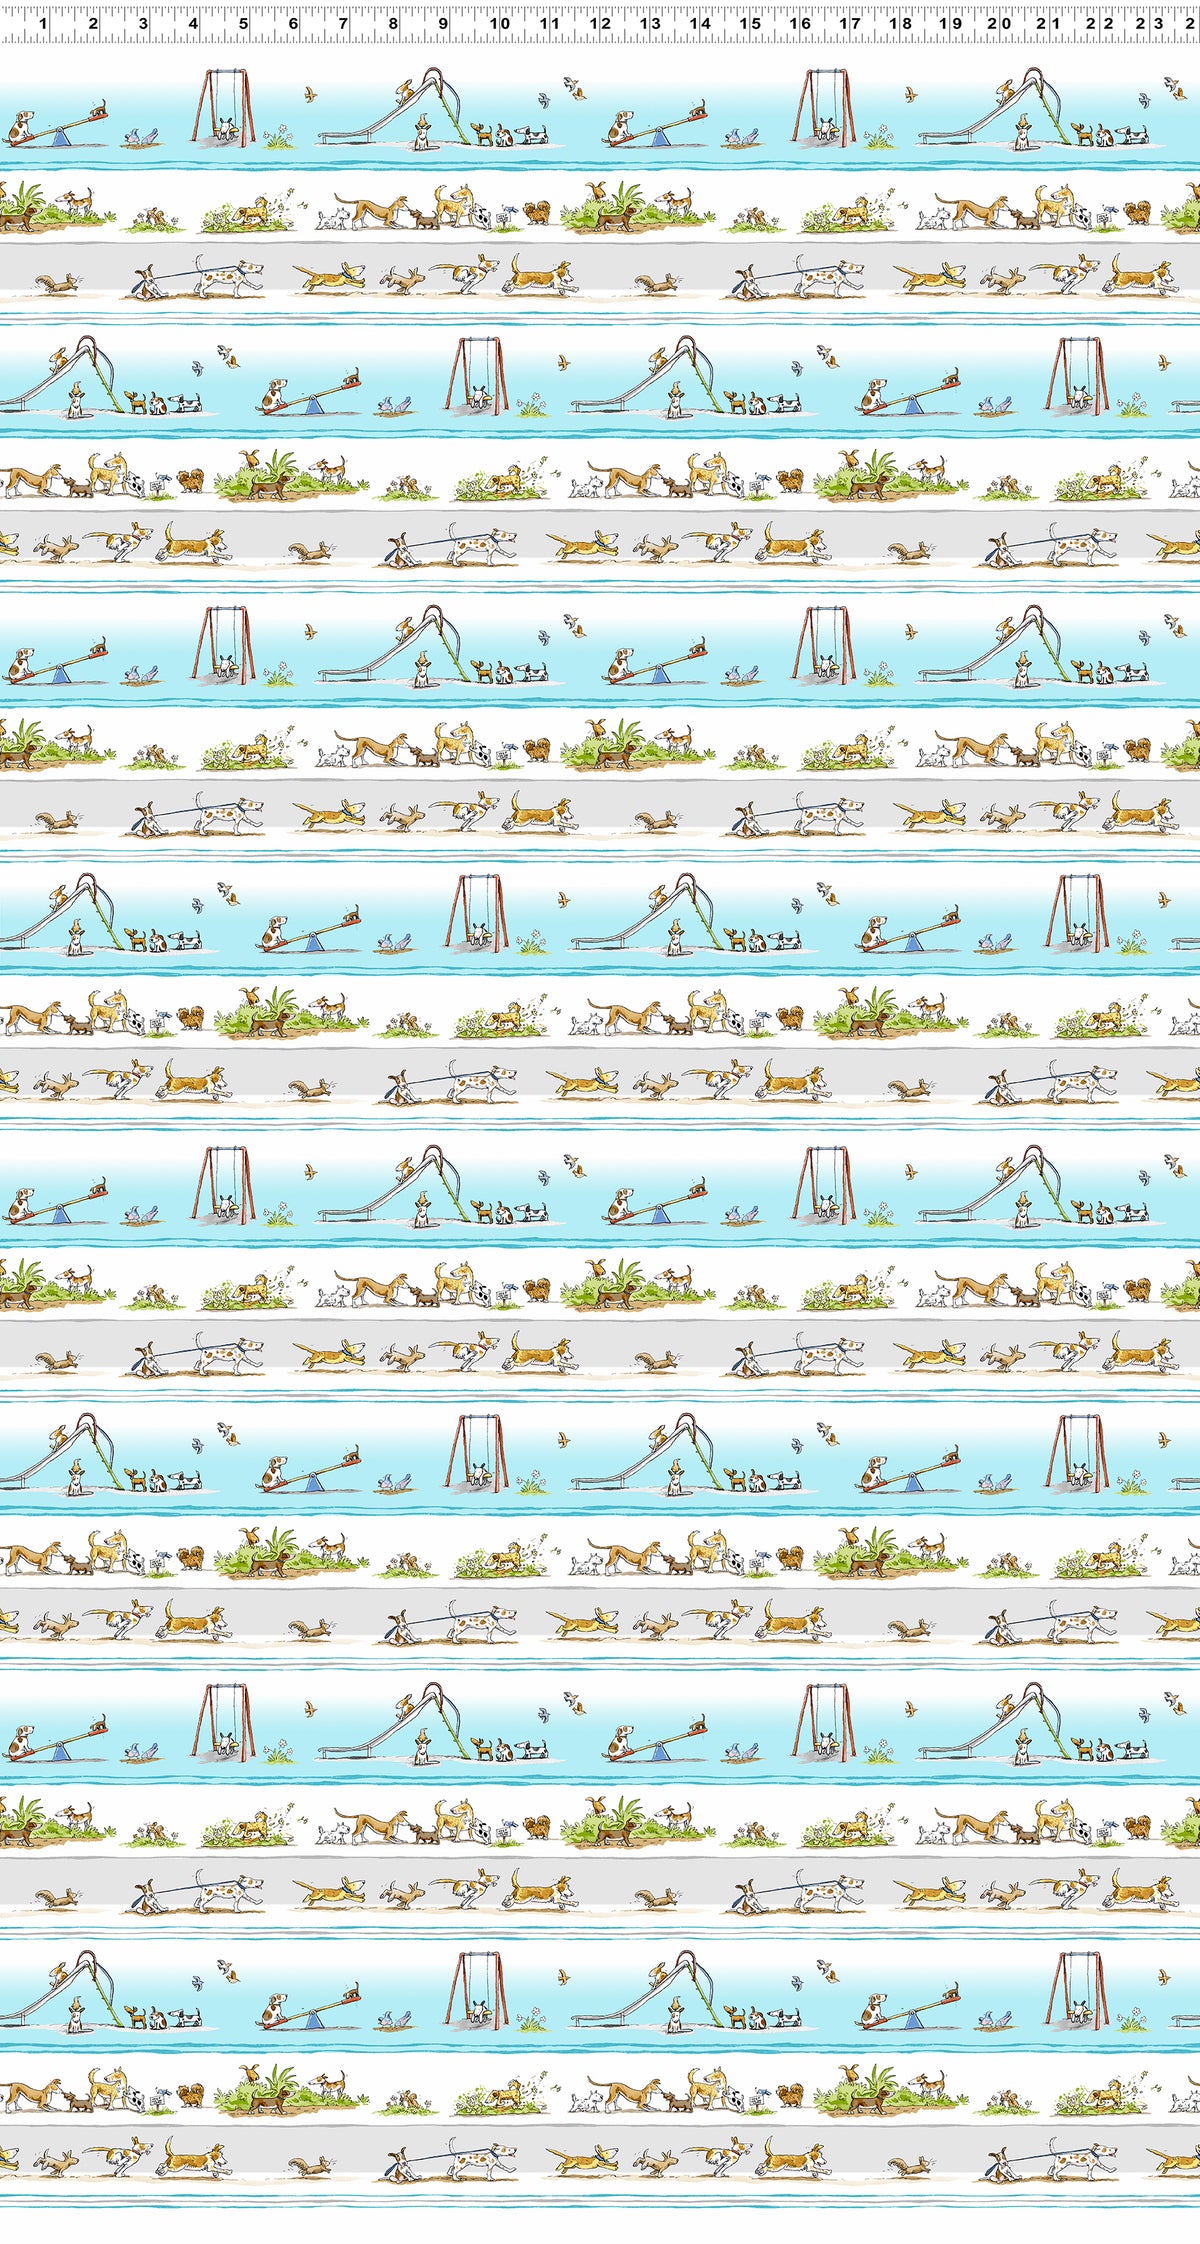 A Day at the Park Quilt Fabric - Dogs Pictorial Stripe in Light Pool Blue/Multi - Y3876-123